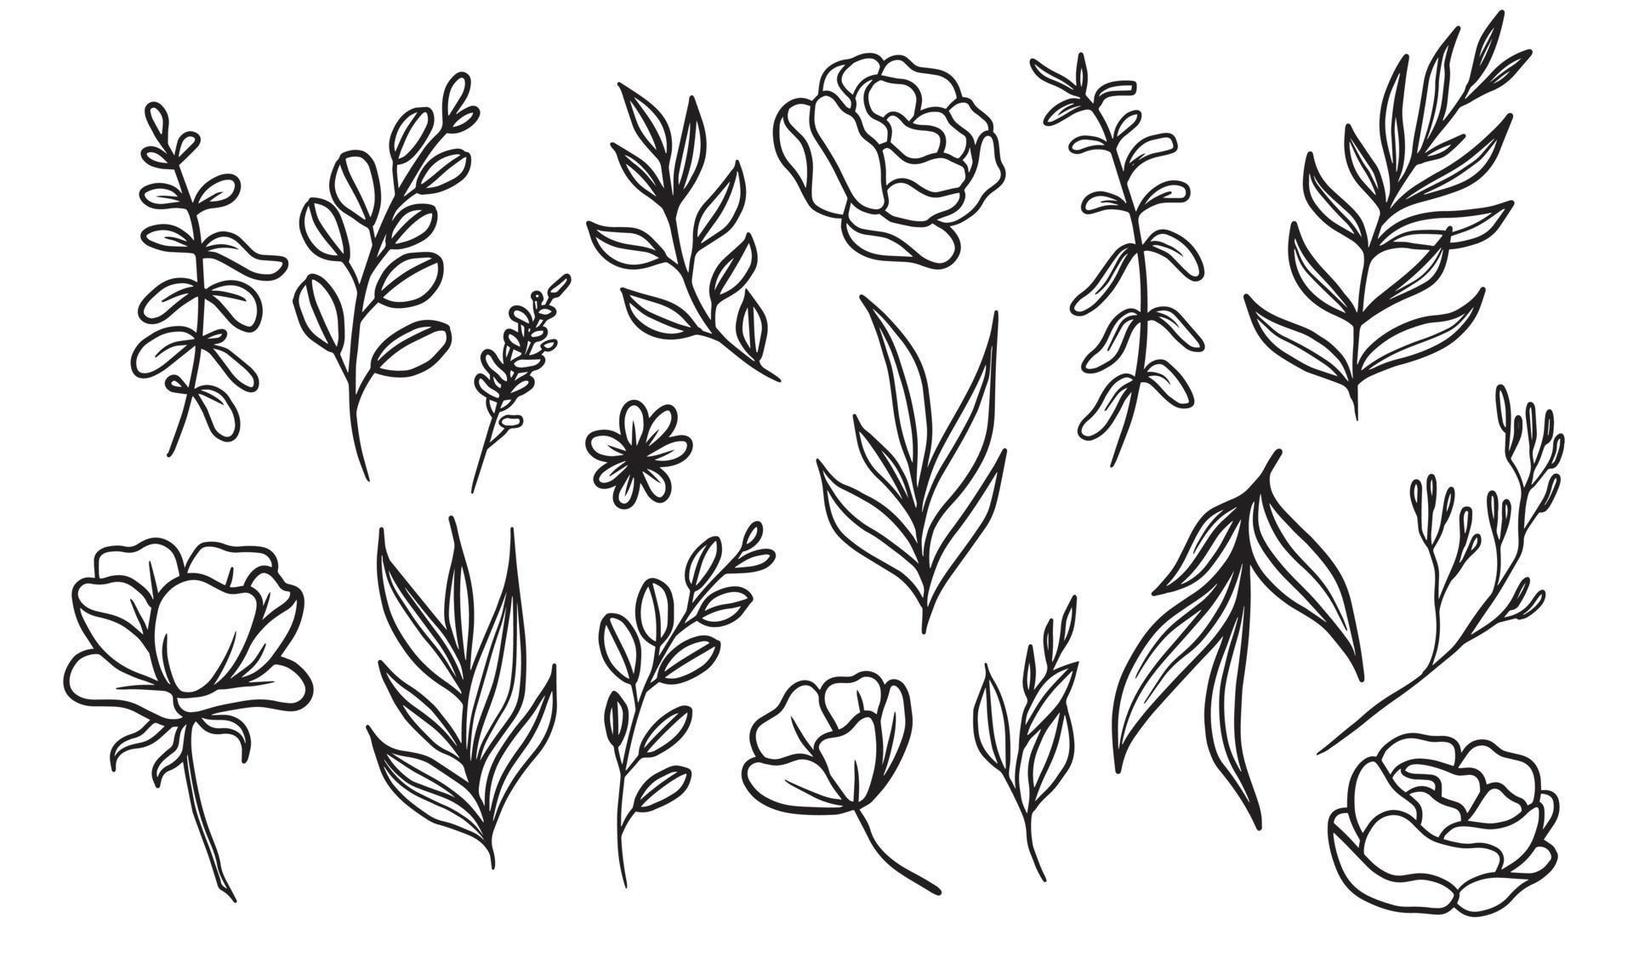 set of hand drawn floral elements for your design, leaf and flowers illustration to create romantic or vintage design, plant isolated graphic very easy add to your design project vector